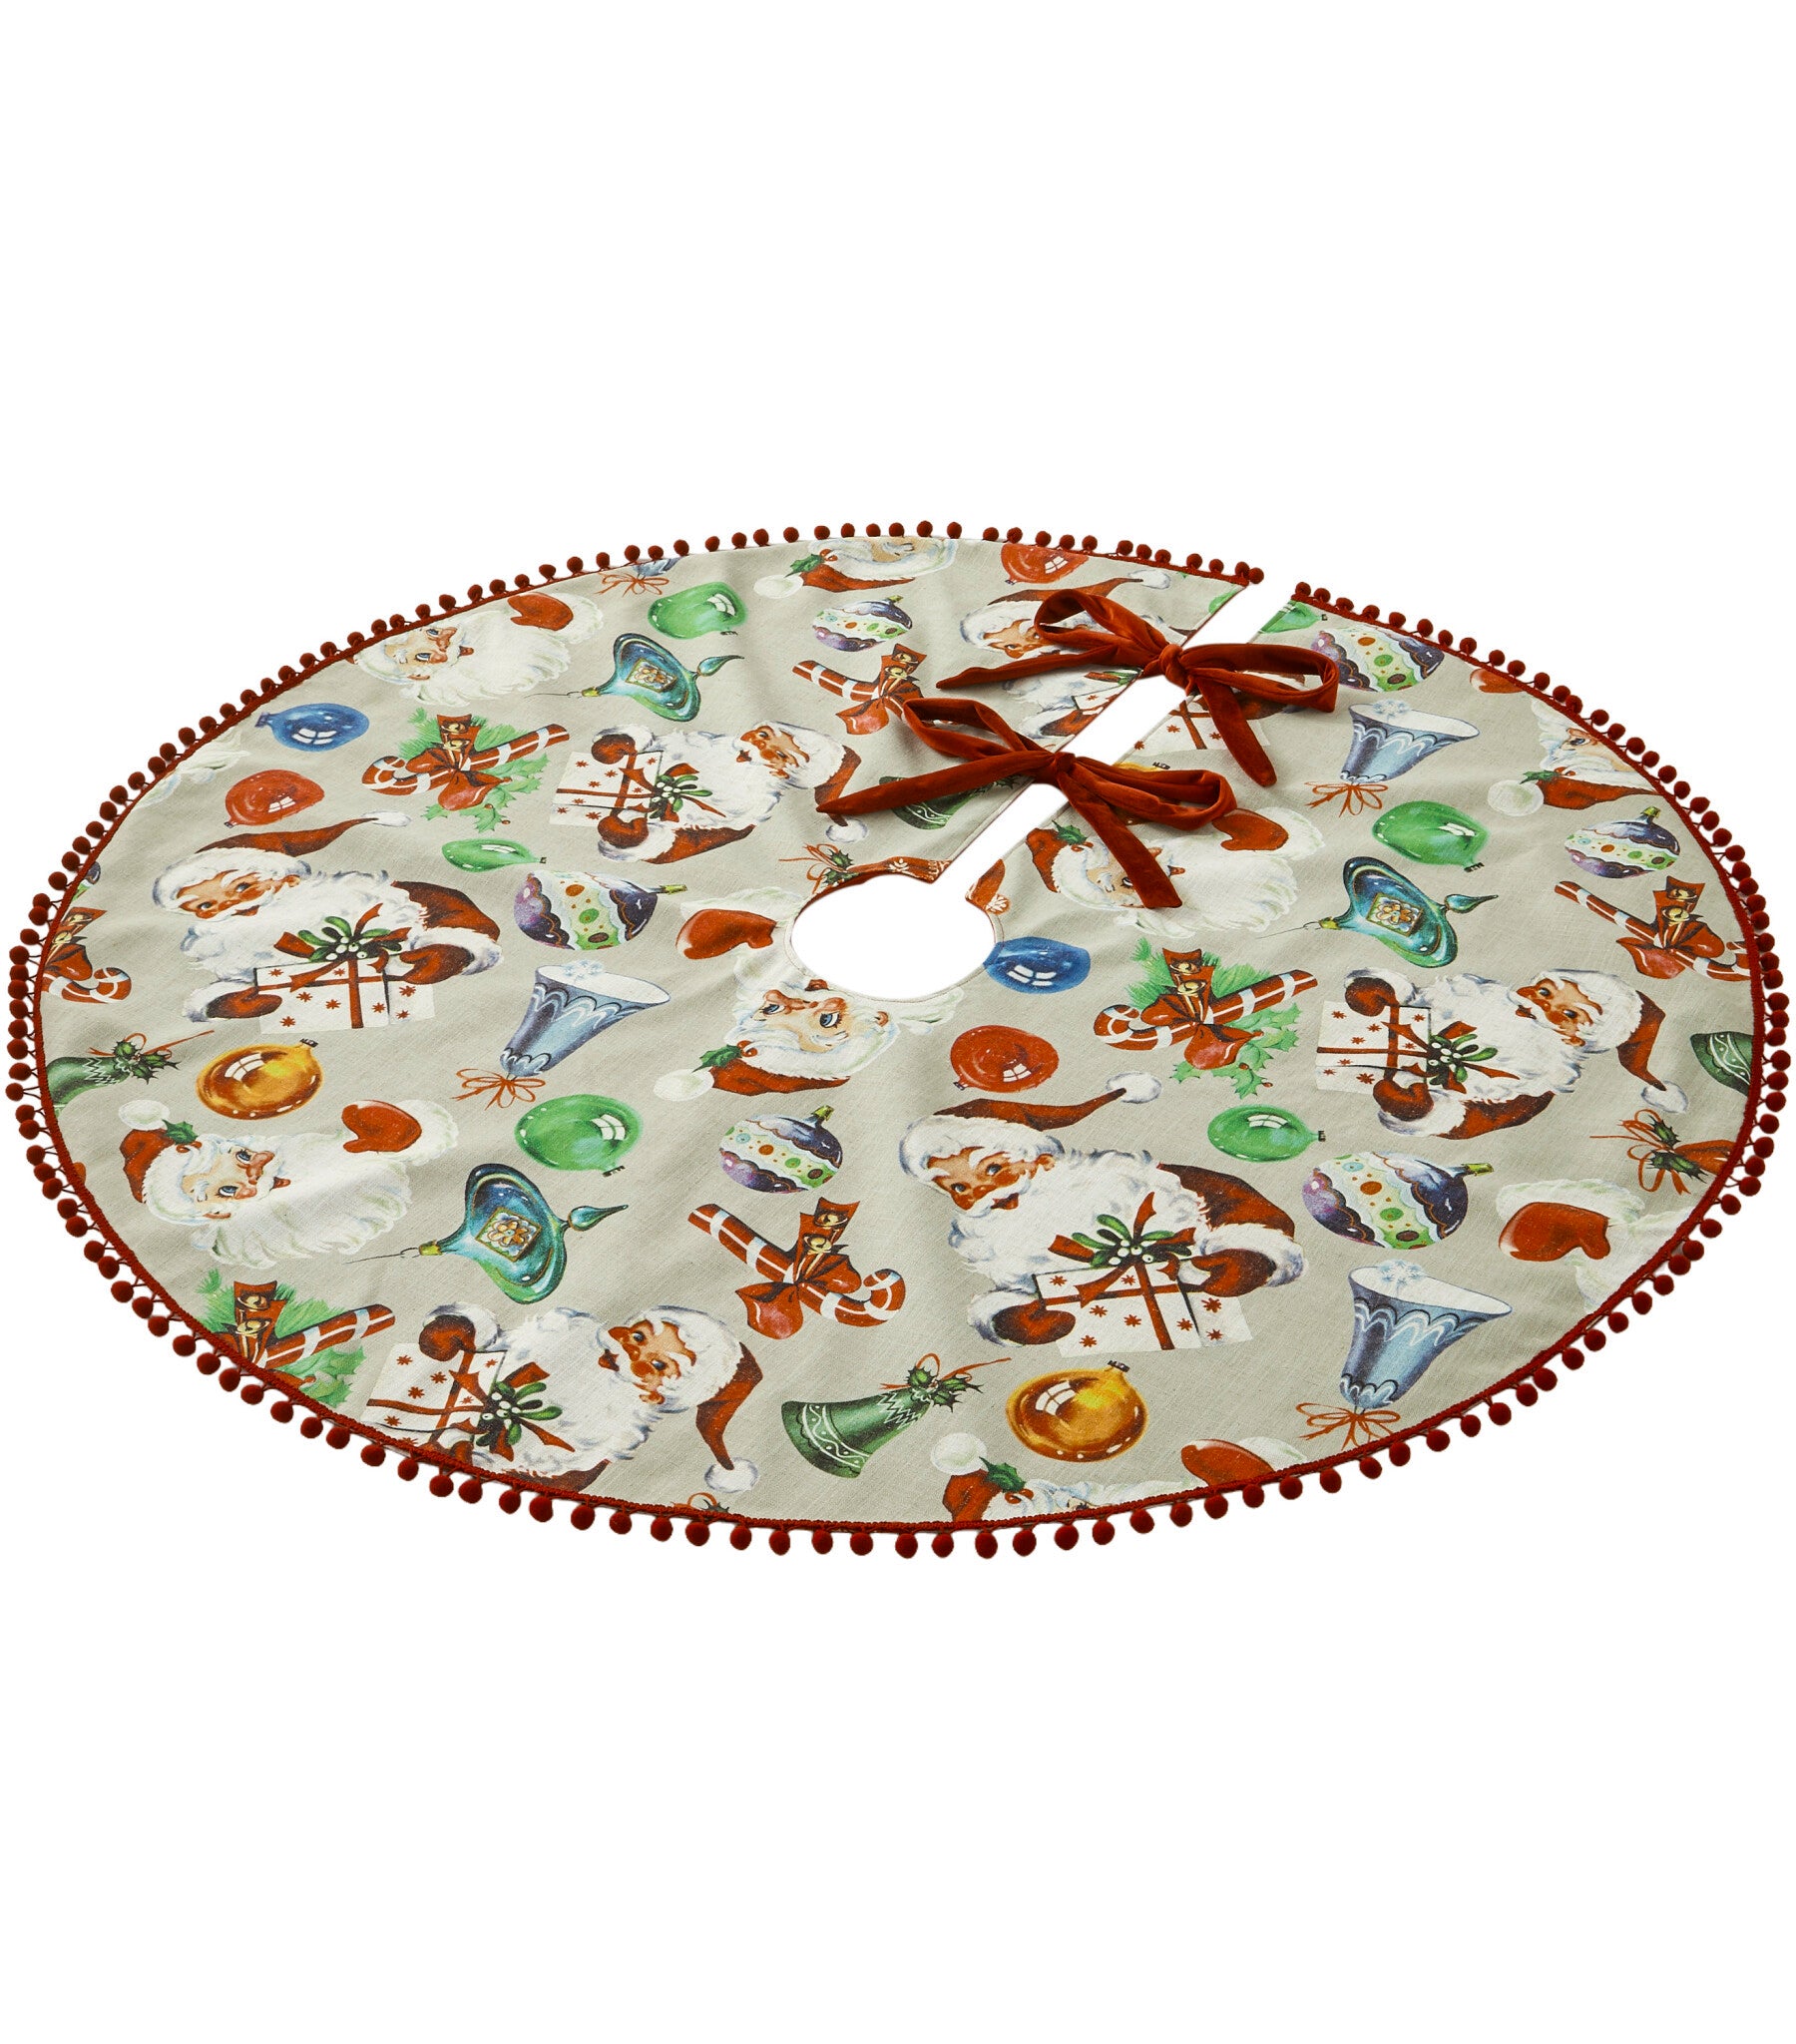 Retro Christmas Tree Skirt with Vintage Images